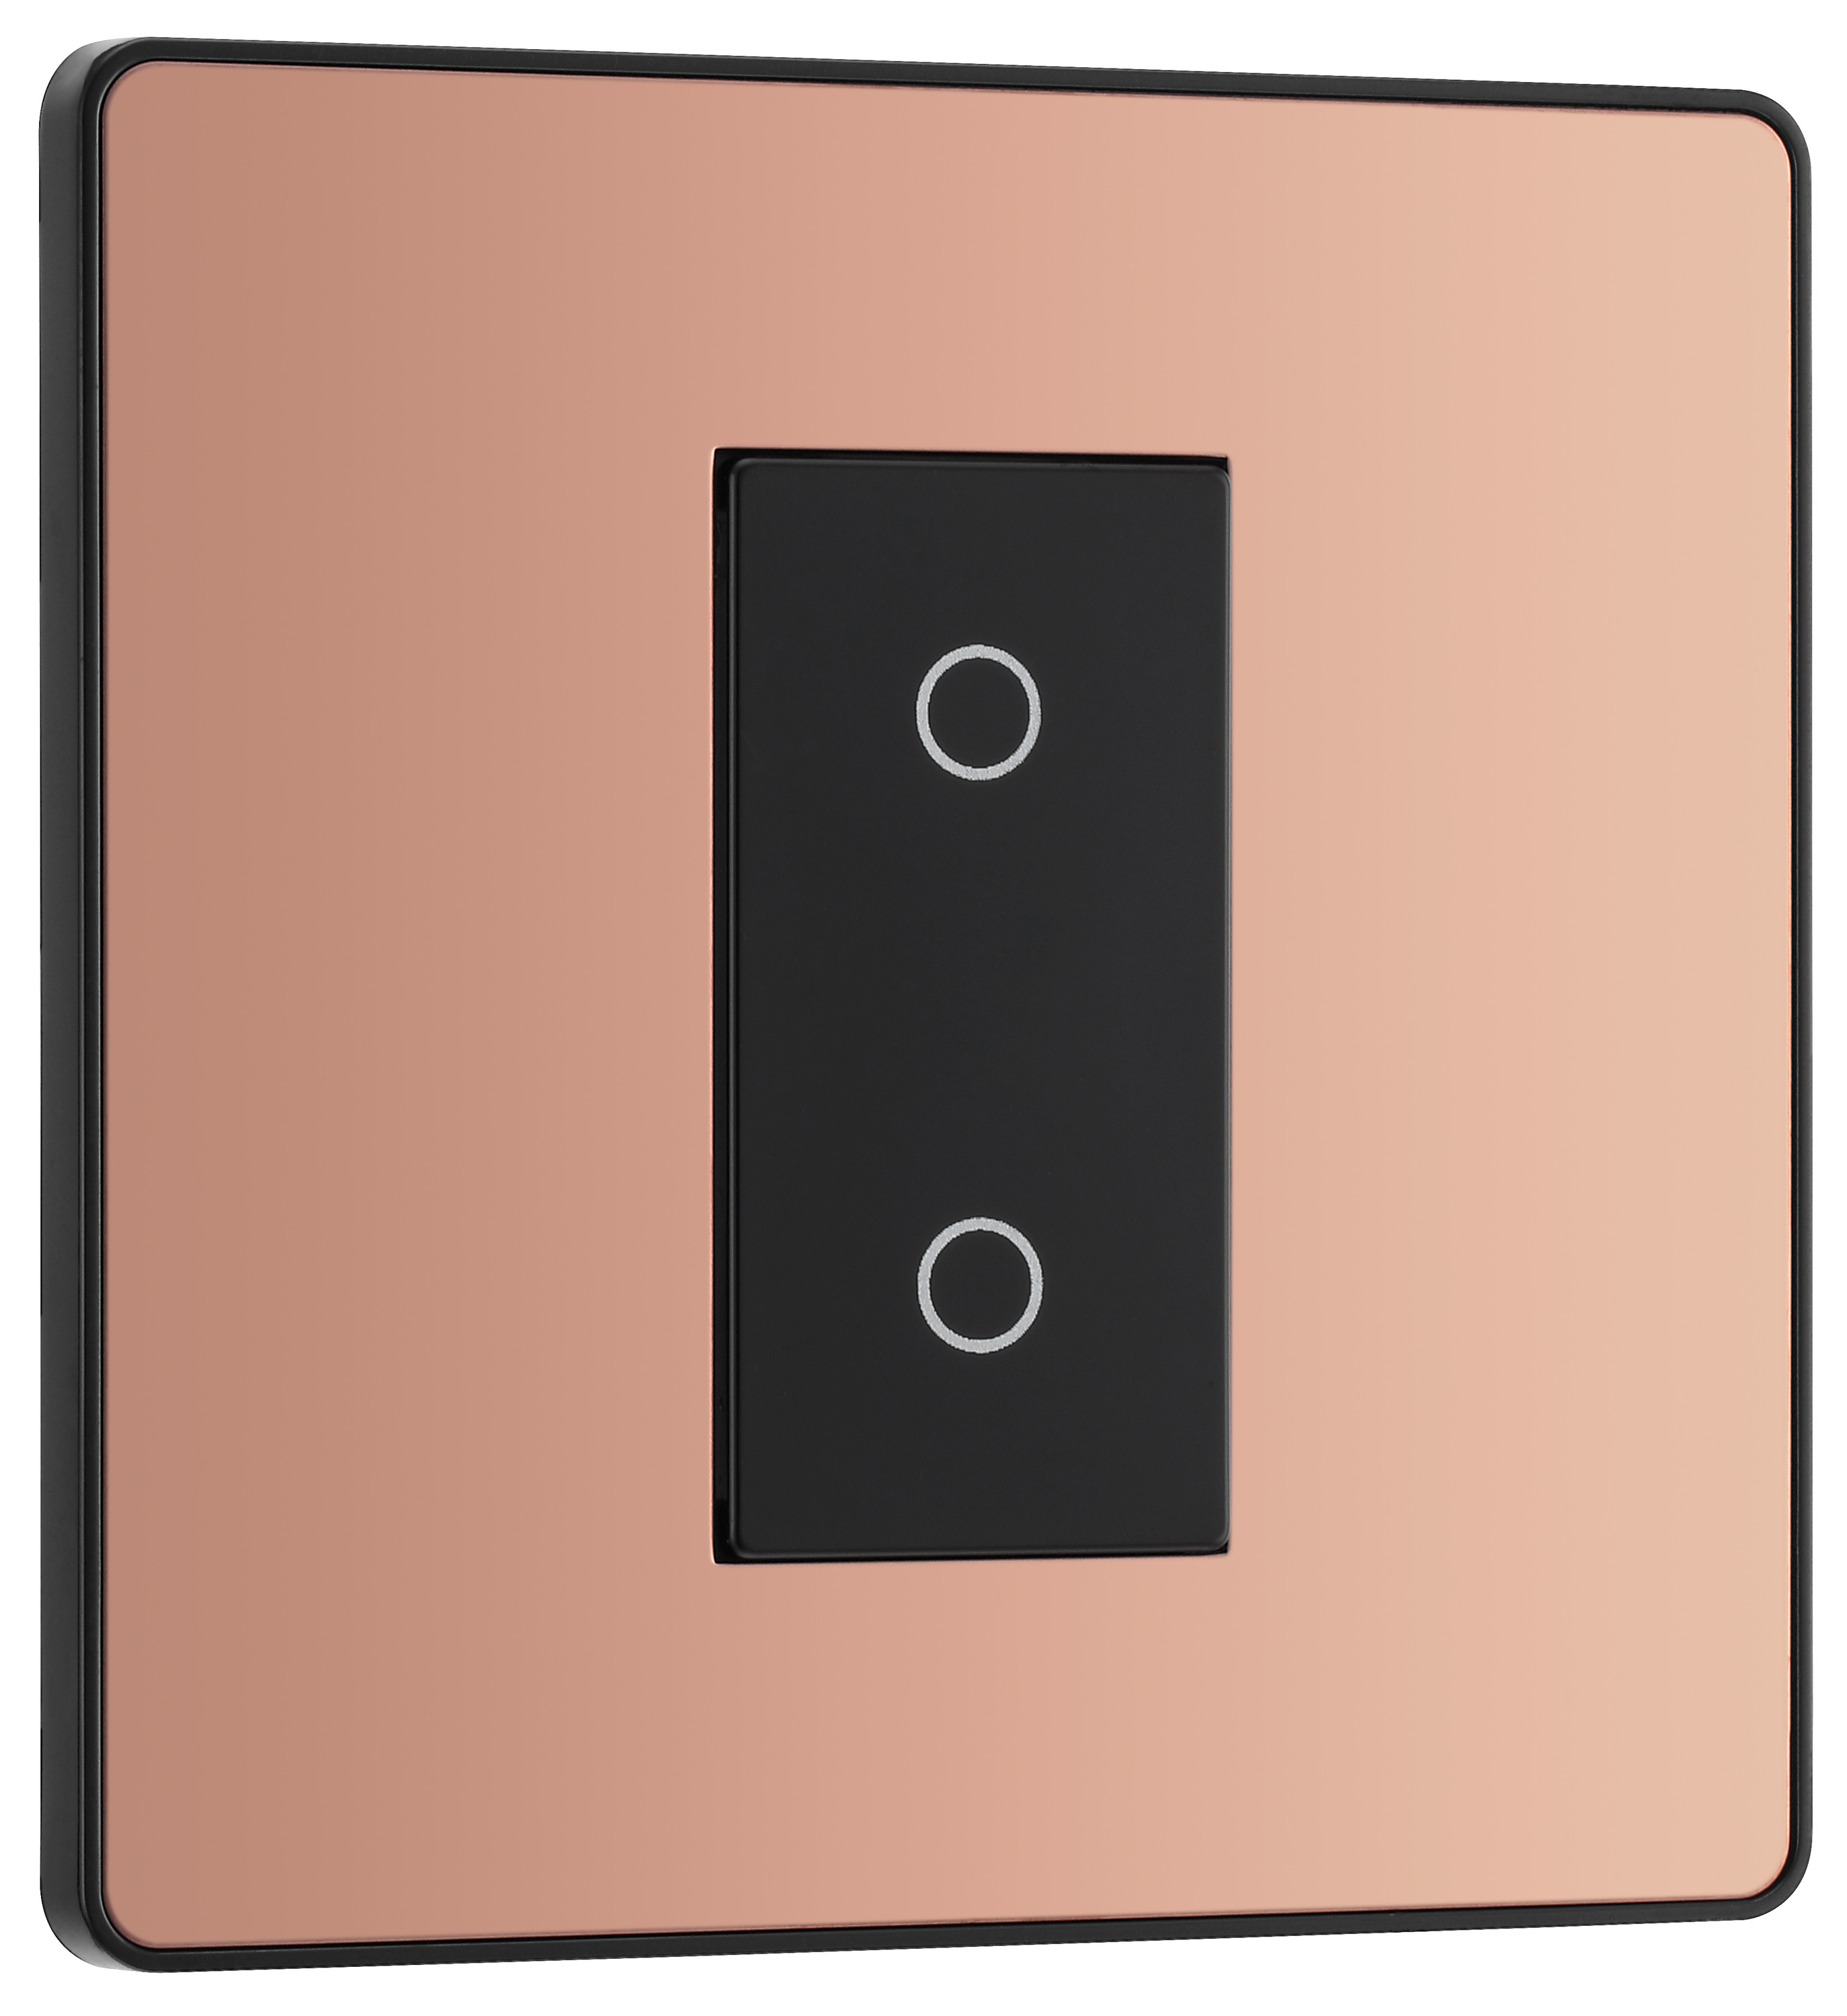 Image of BG Evolve Secondary Polished Copper 2 Way Single Touch Dimmer Switch - 200W